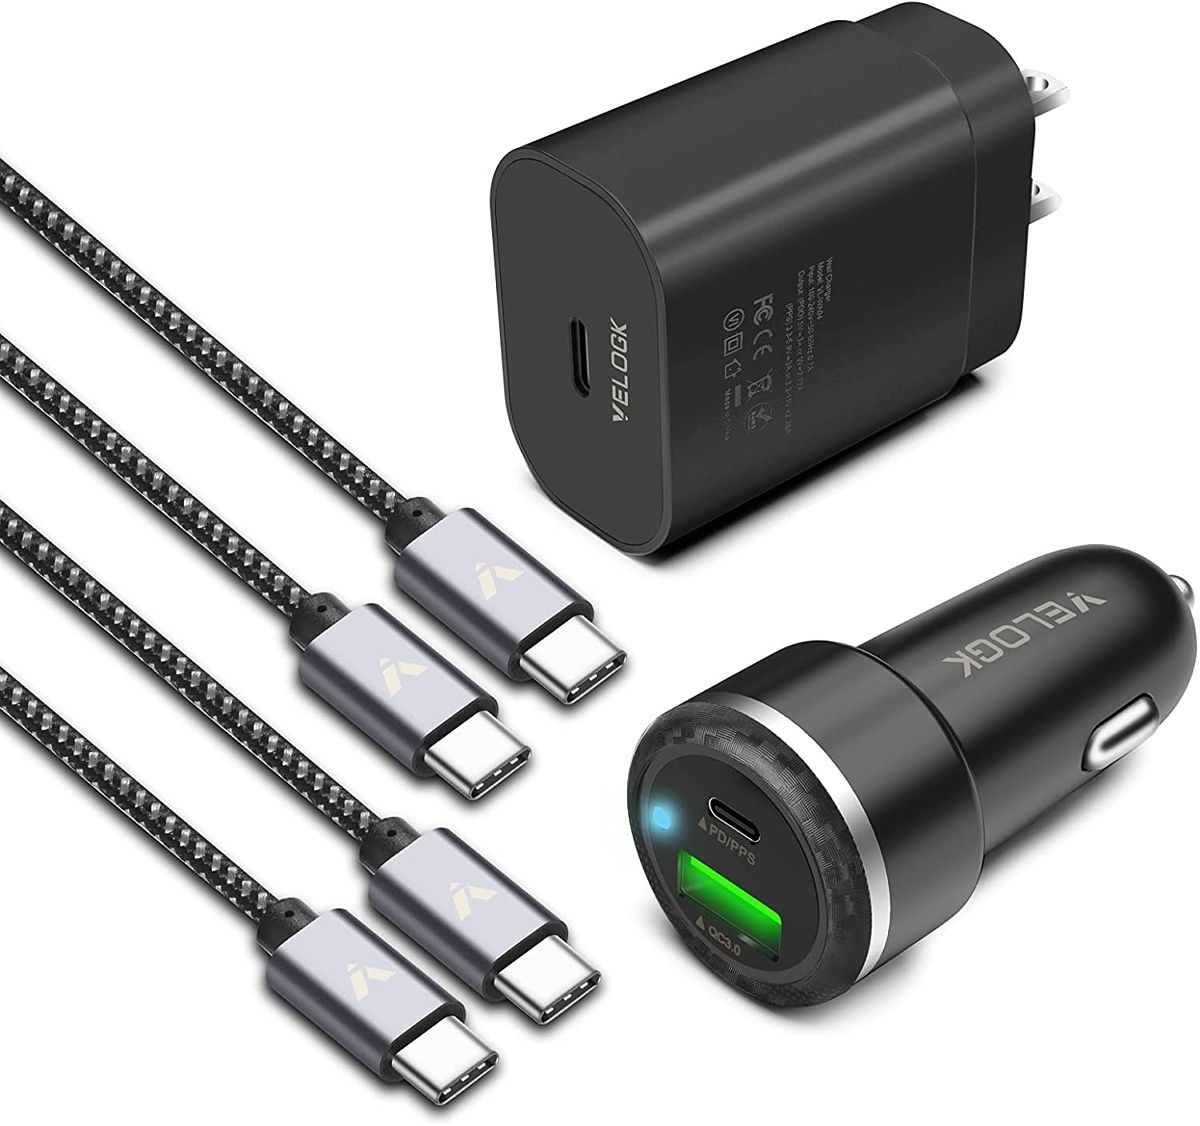 This kit includes a wall adaptor, a car fast-charger, and a set of two USB-C braided cables.